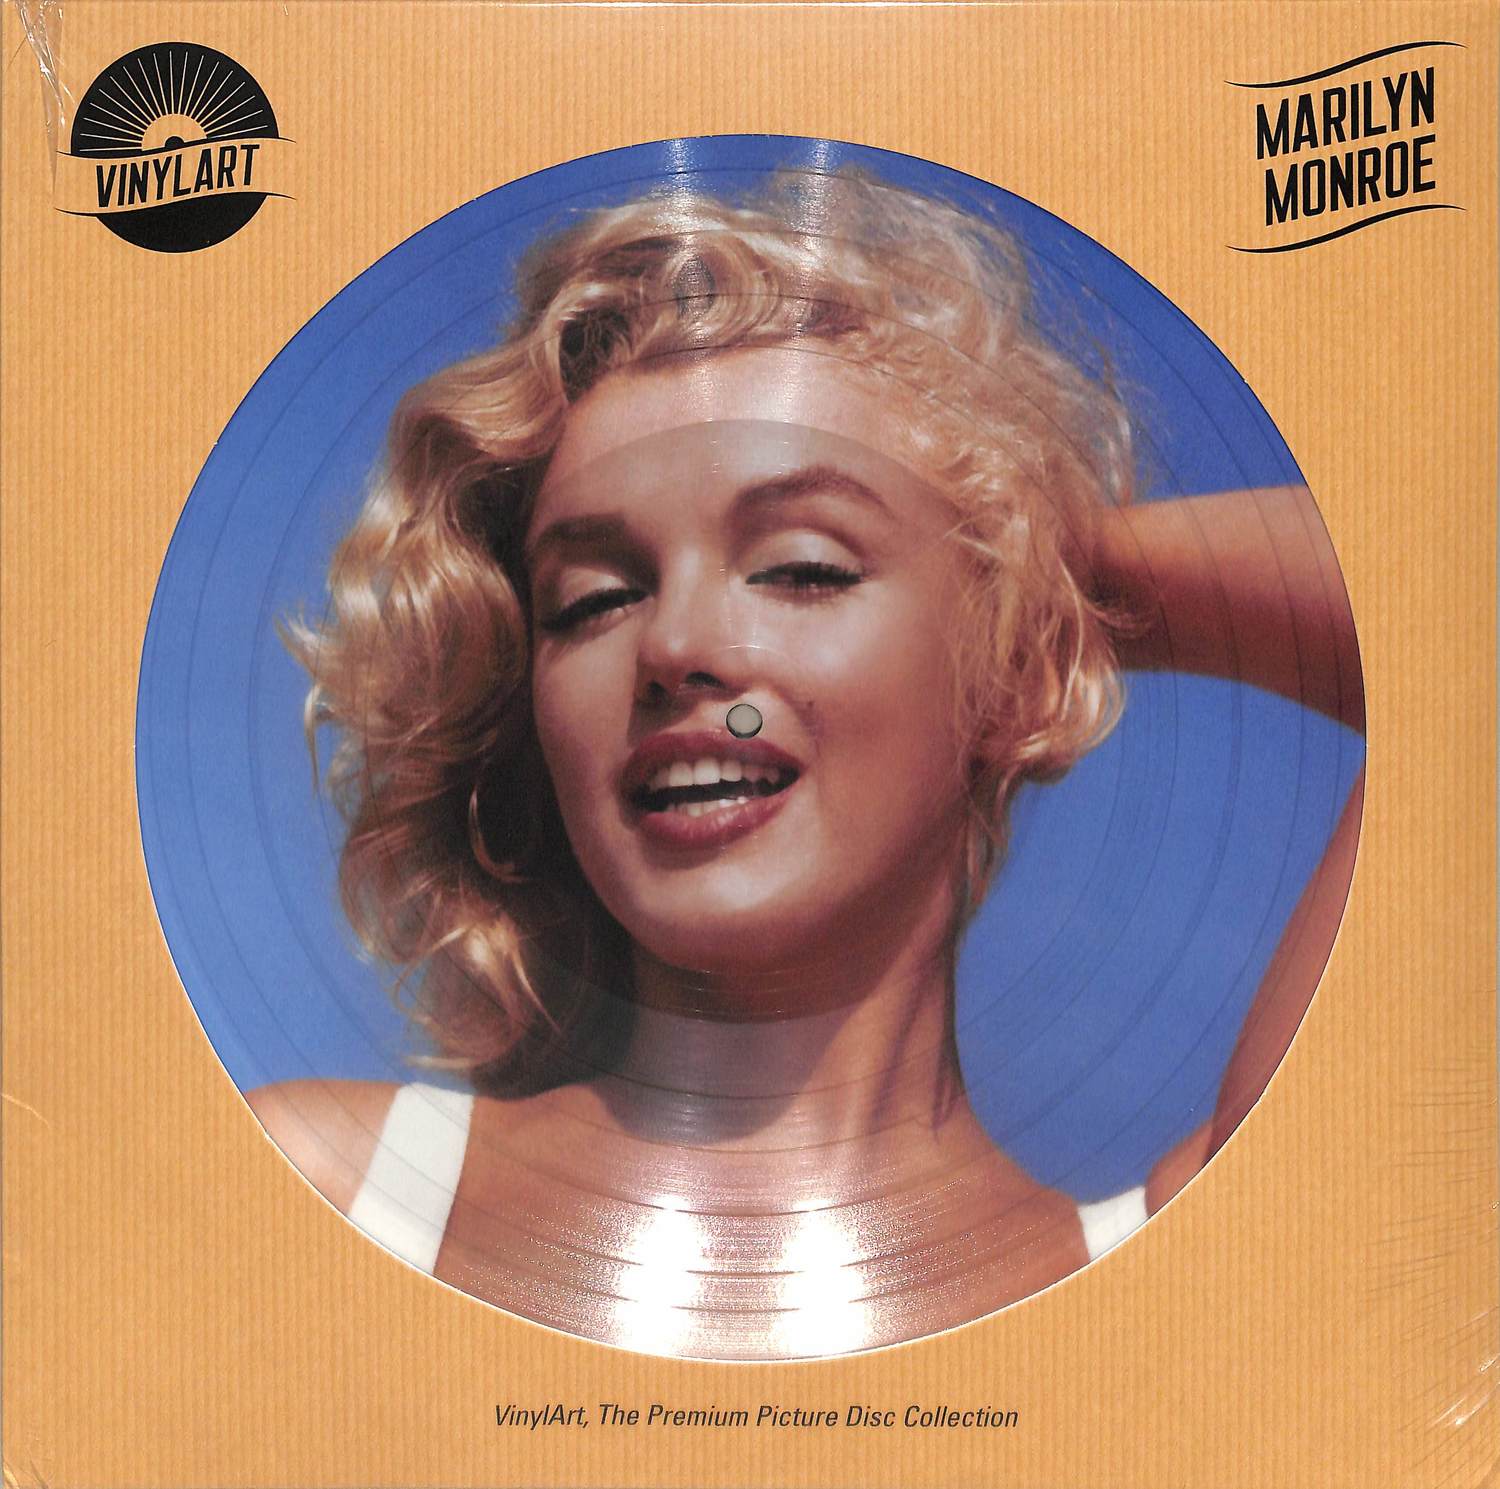 Marilyn Monroe - VINYLART - THE PREMIUM PICTURE DISC COLLECTION 